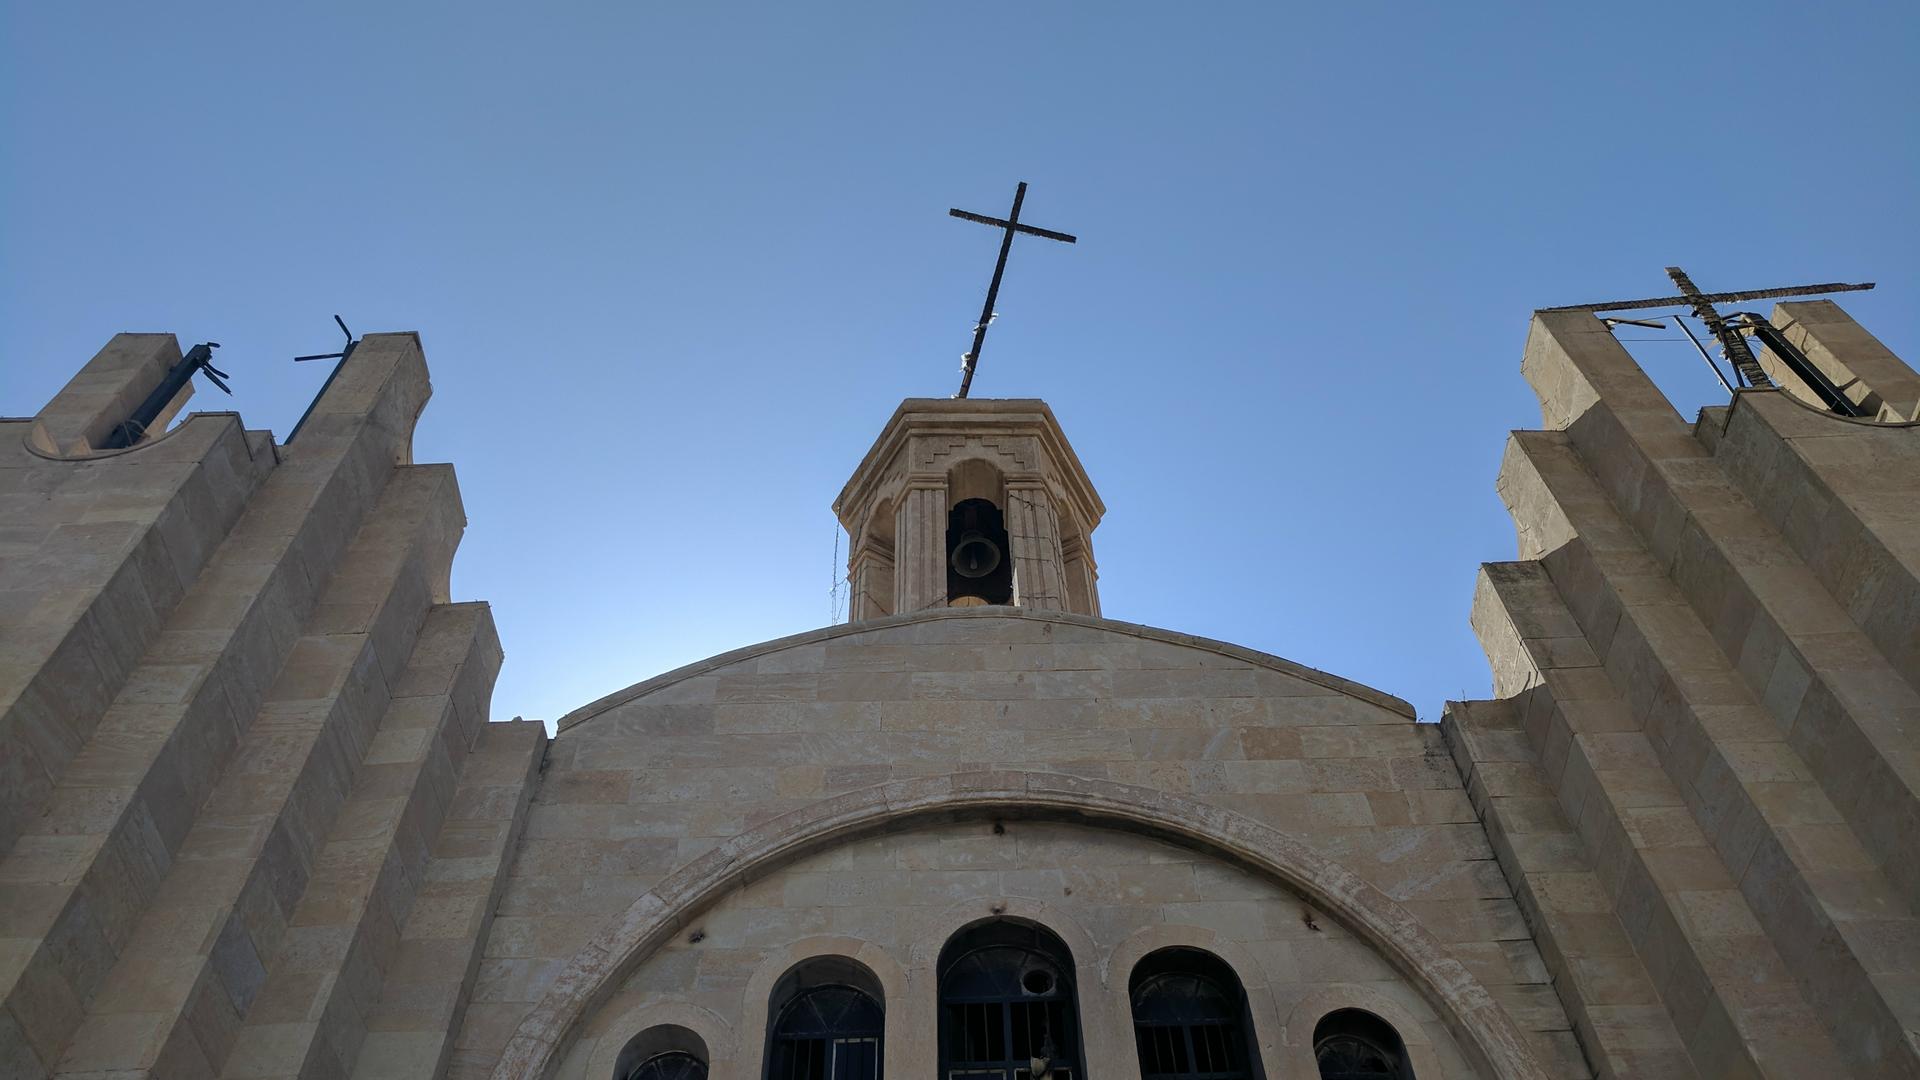 St. Shmuni Church in Bartella, Iraq, shows damage sustained while the town was under ISIS control for two years.